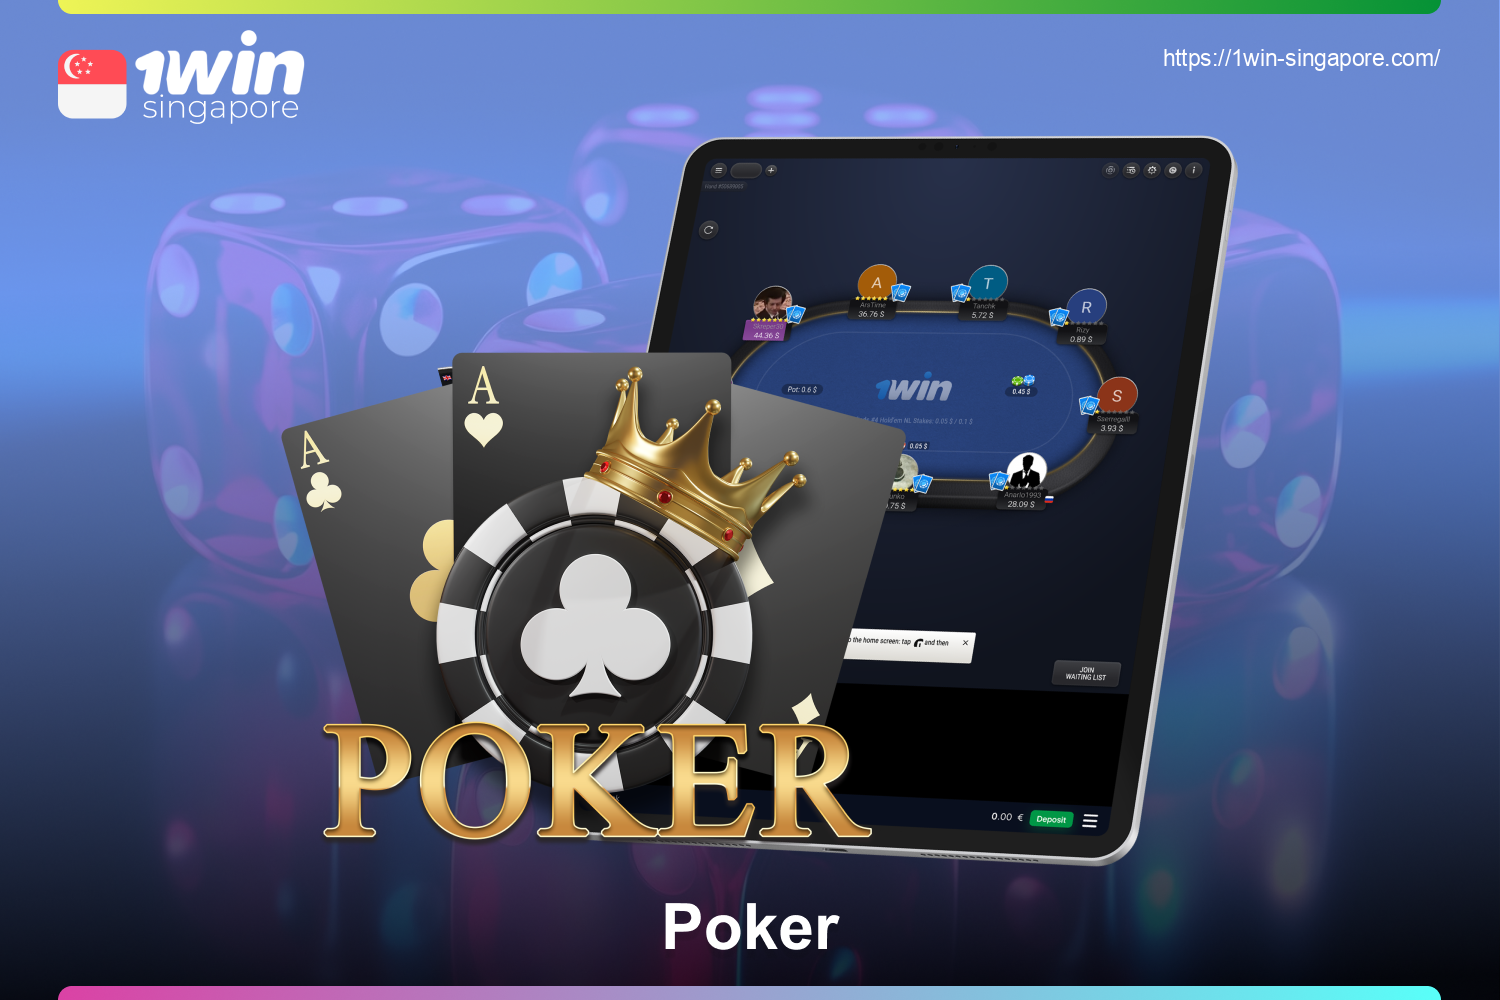 Singaporeans can play online poker with other players at 1win, in our very own lobby